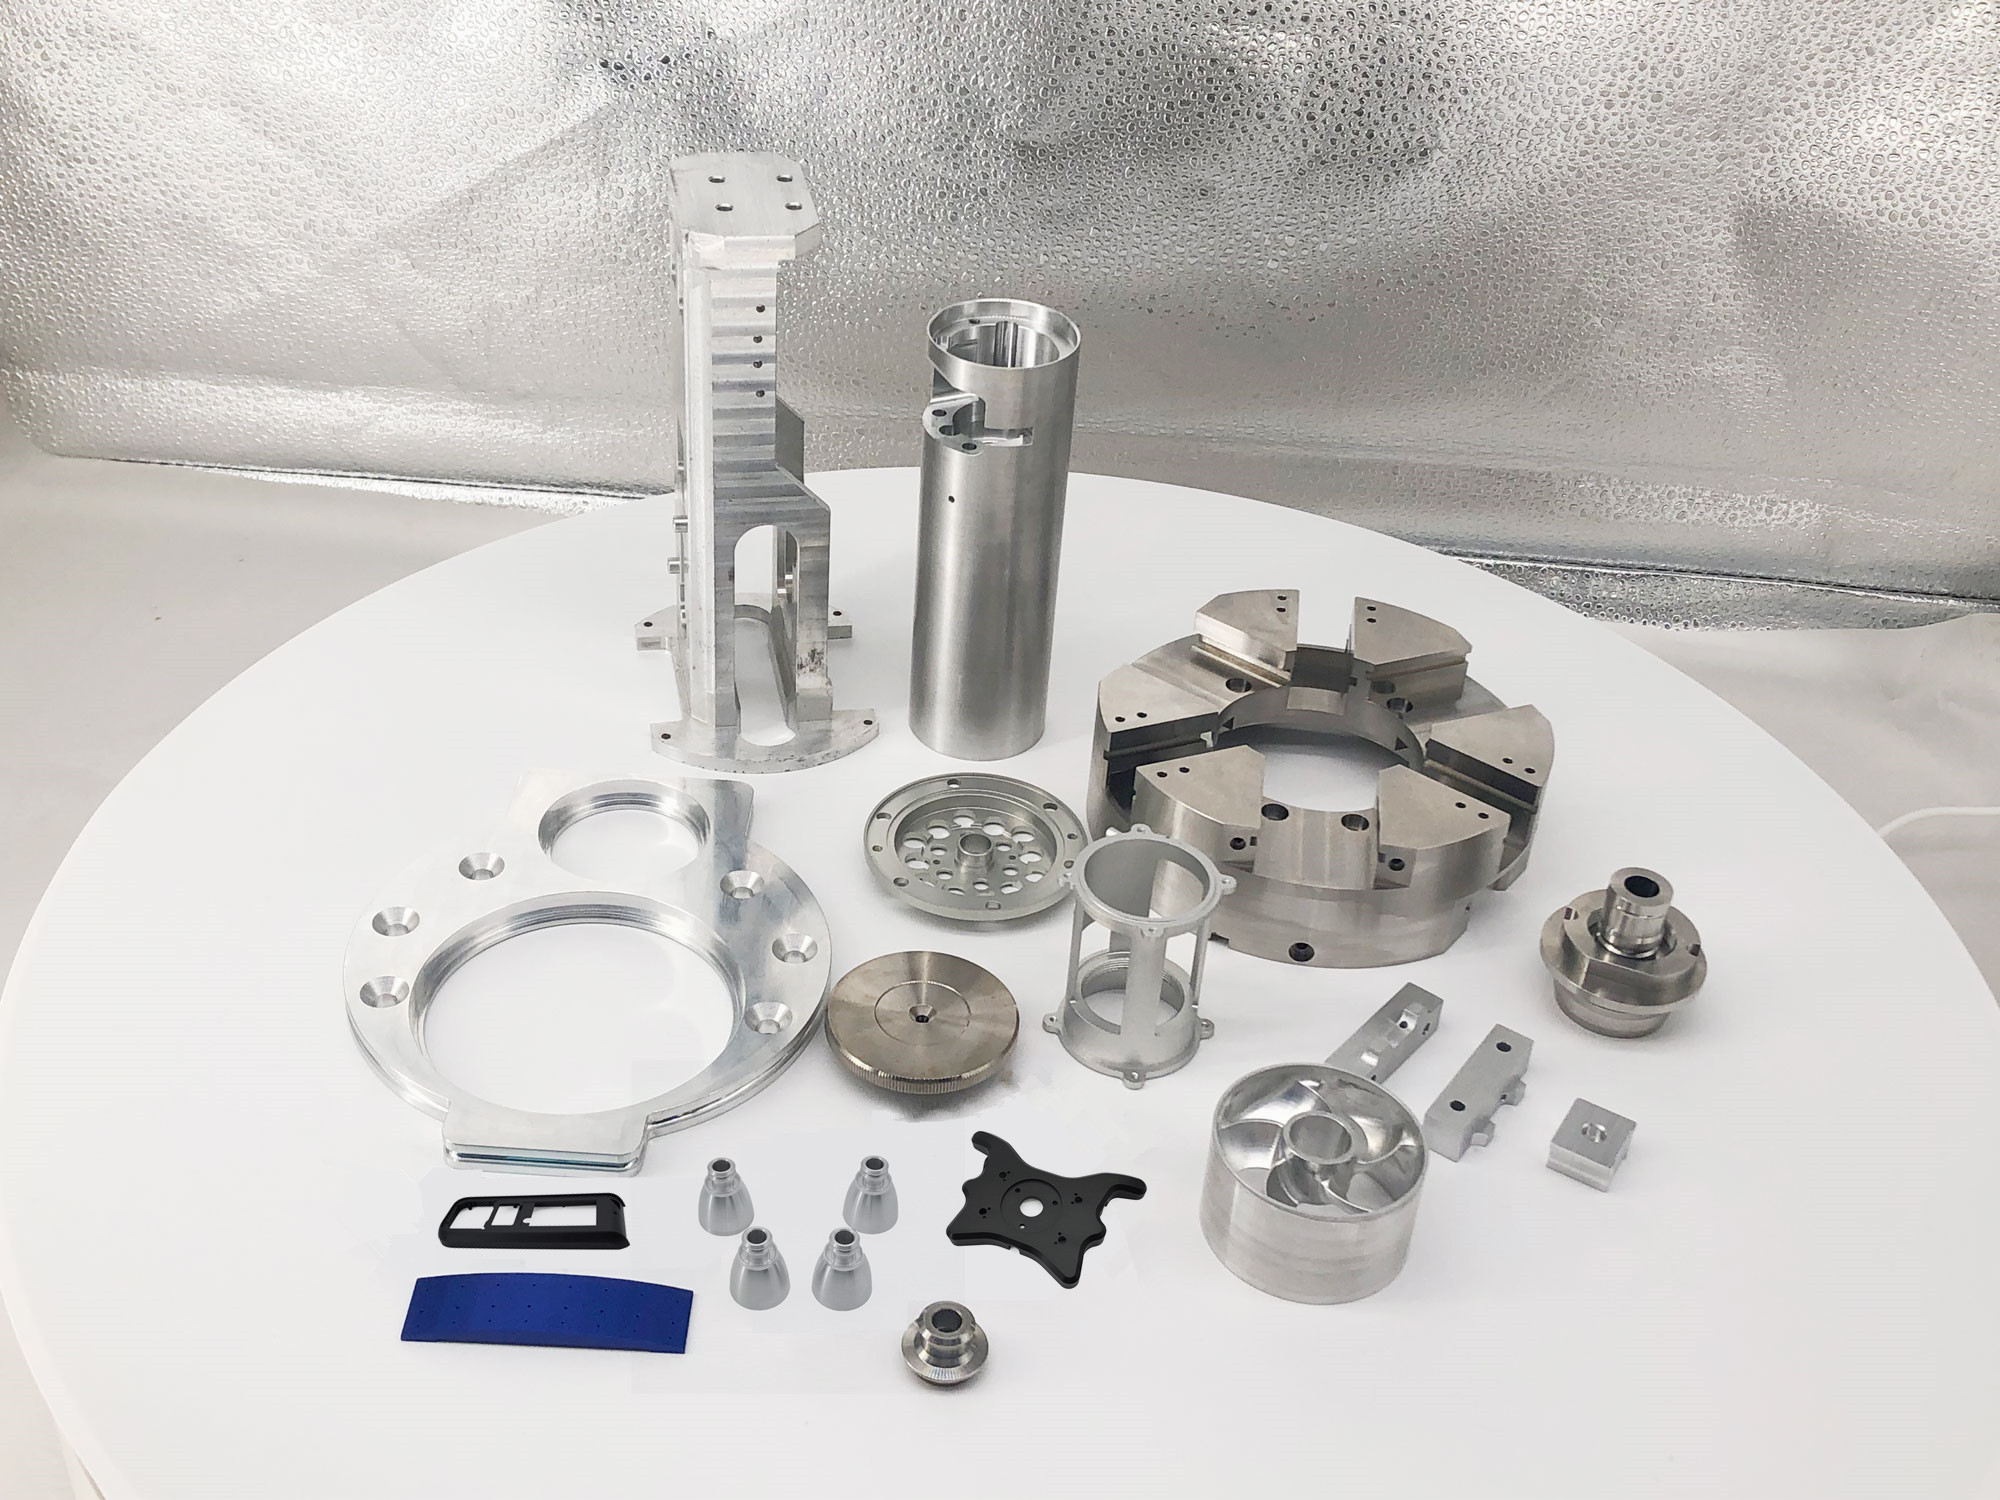 How to ensure the quality of precision machining parts?